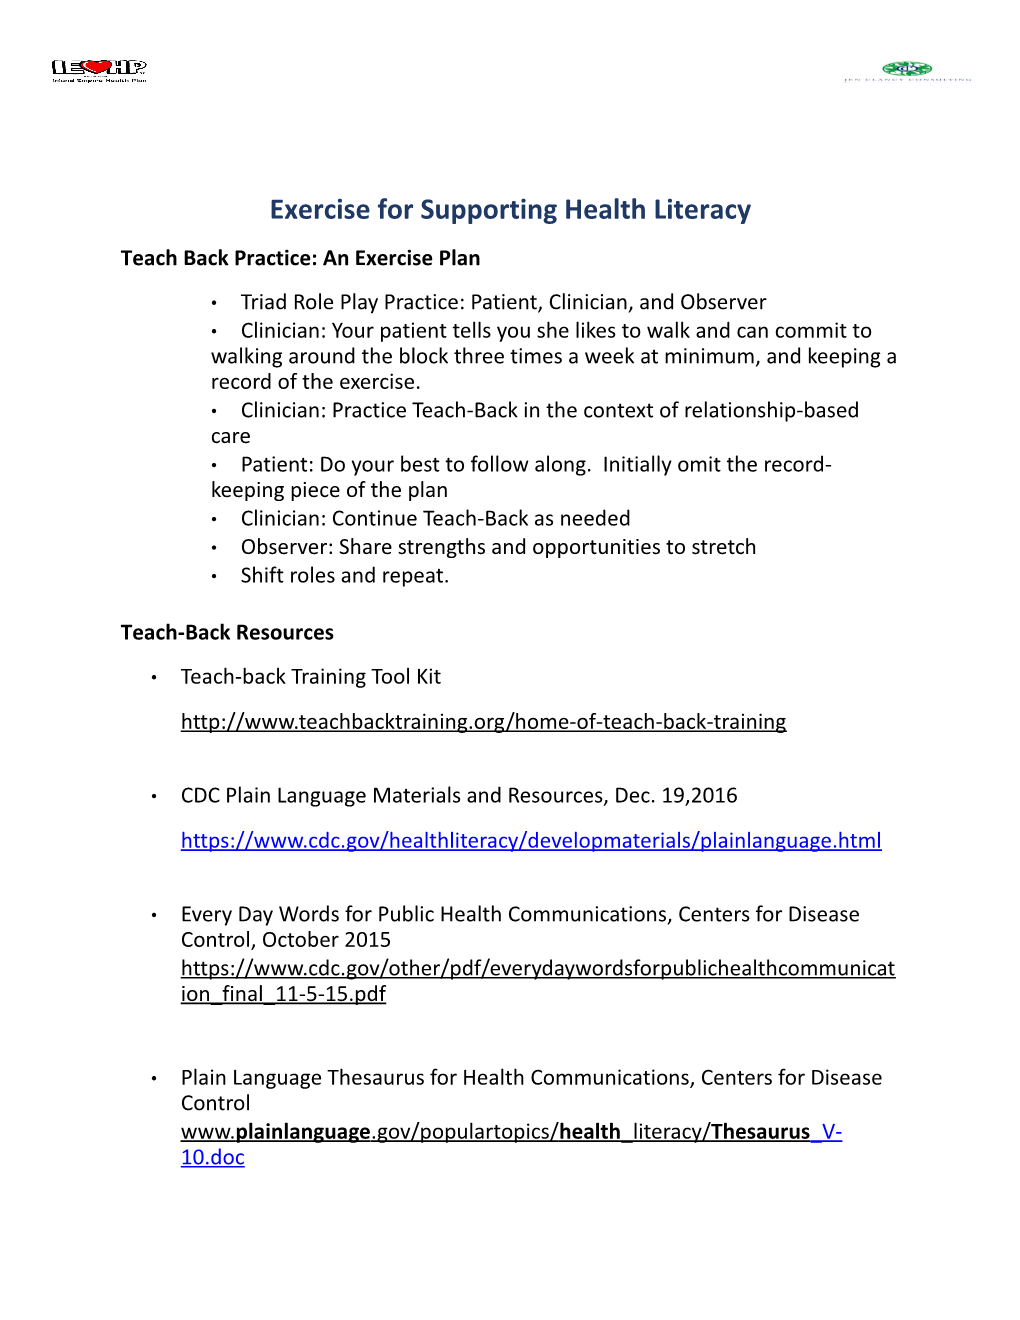 Exercise for Supporting Health Literacy